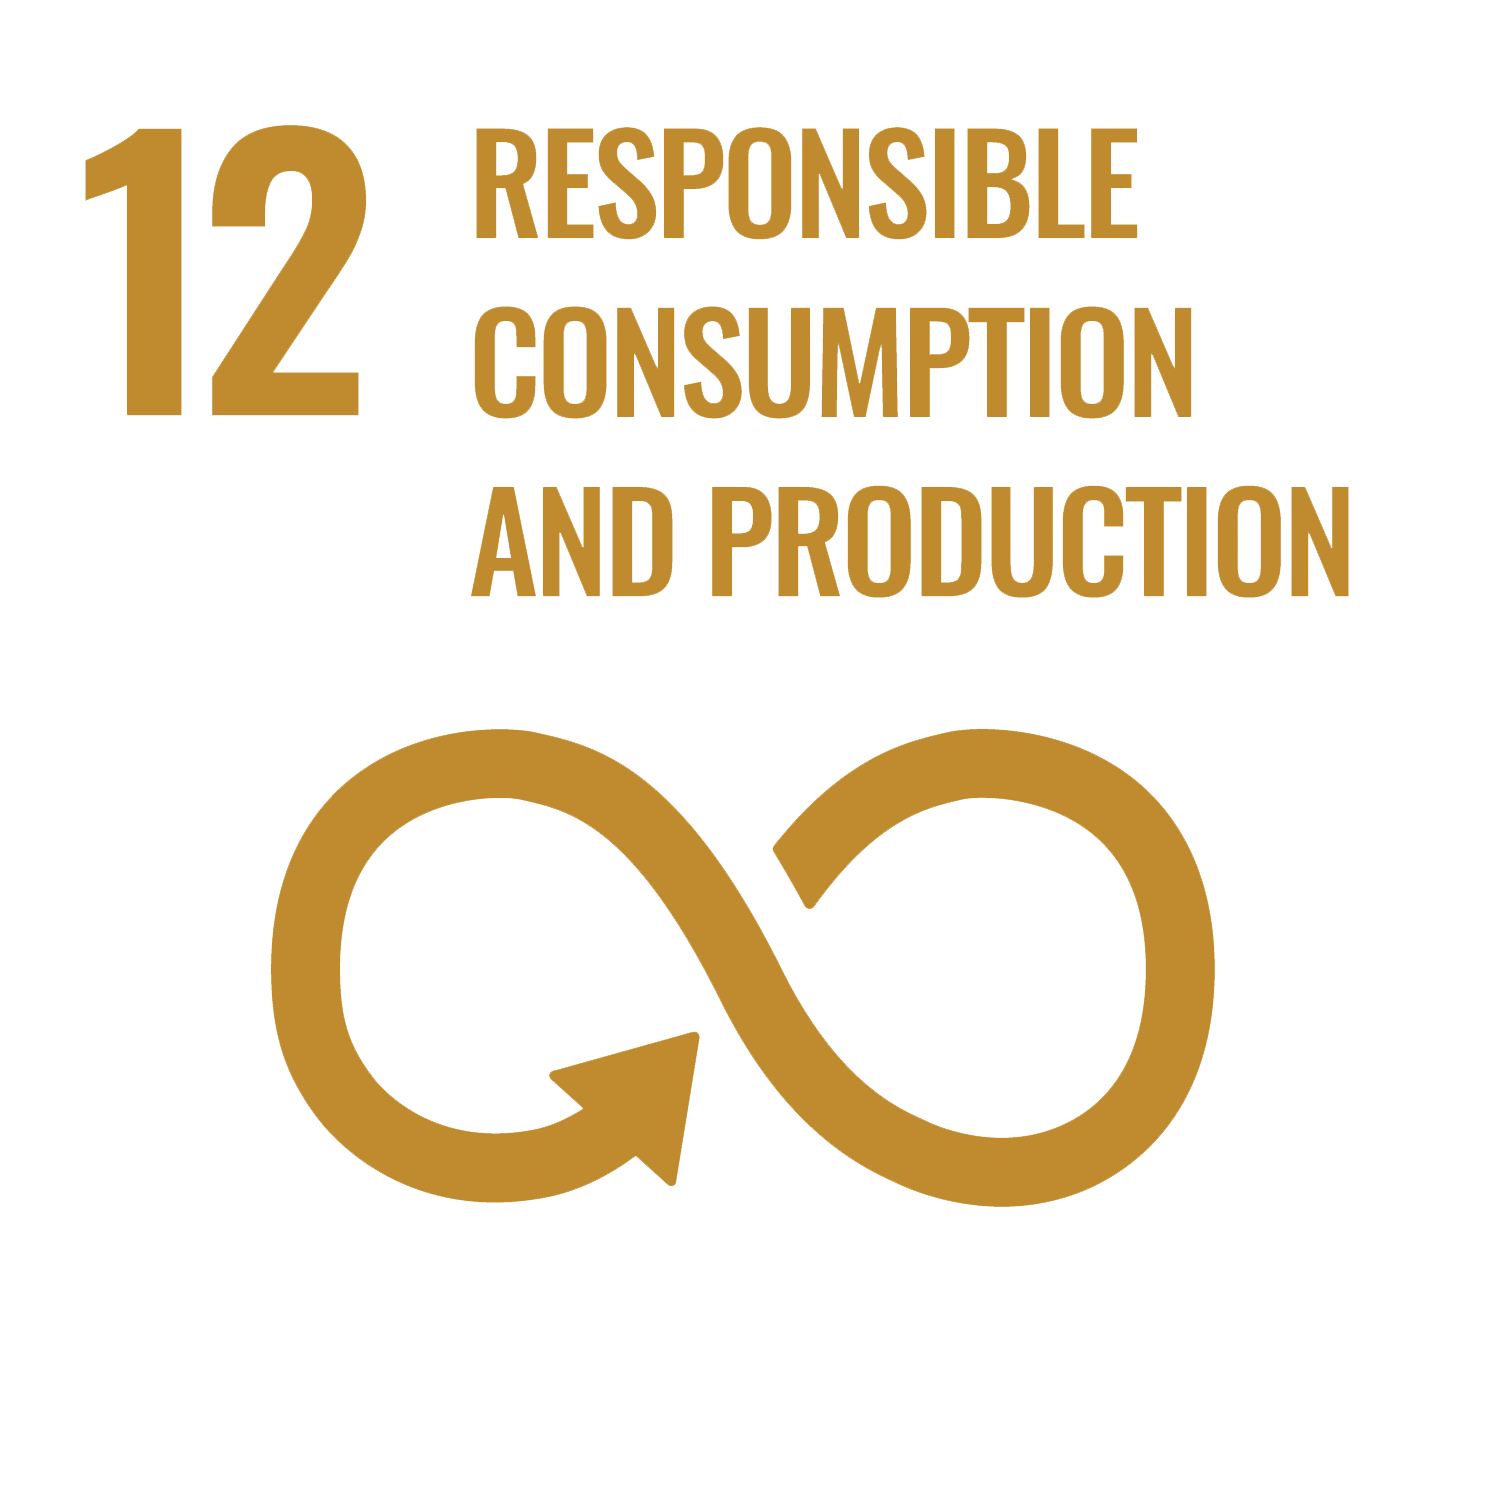 United Nations Goal #12 Responsible Consumption and Production